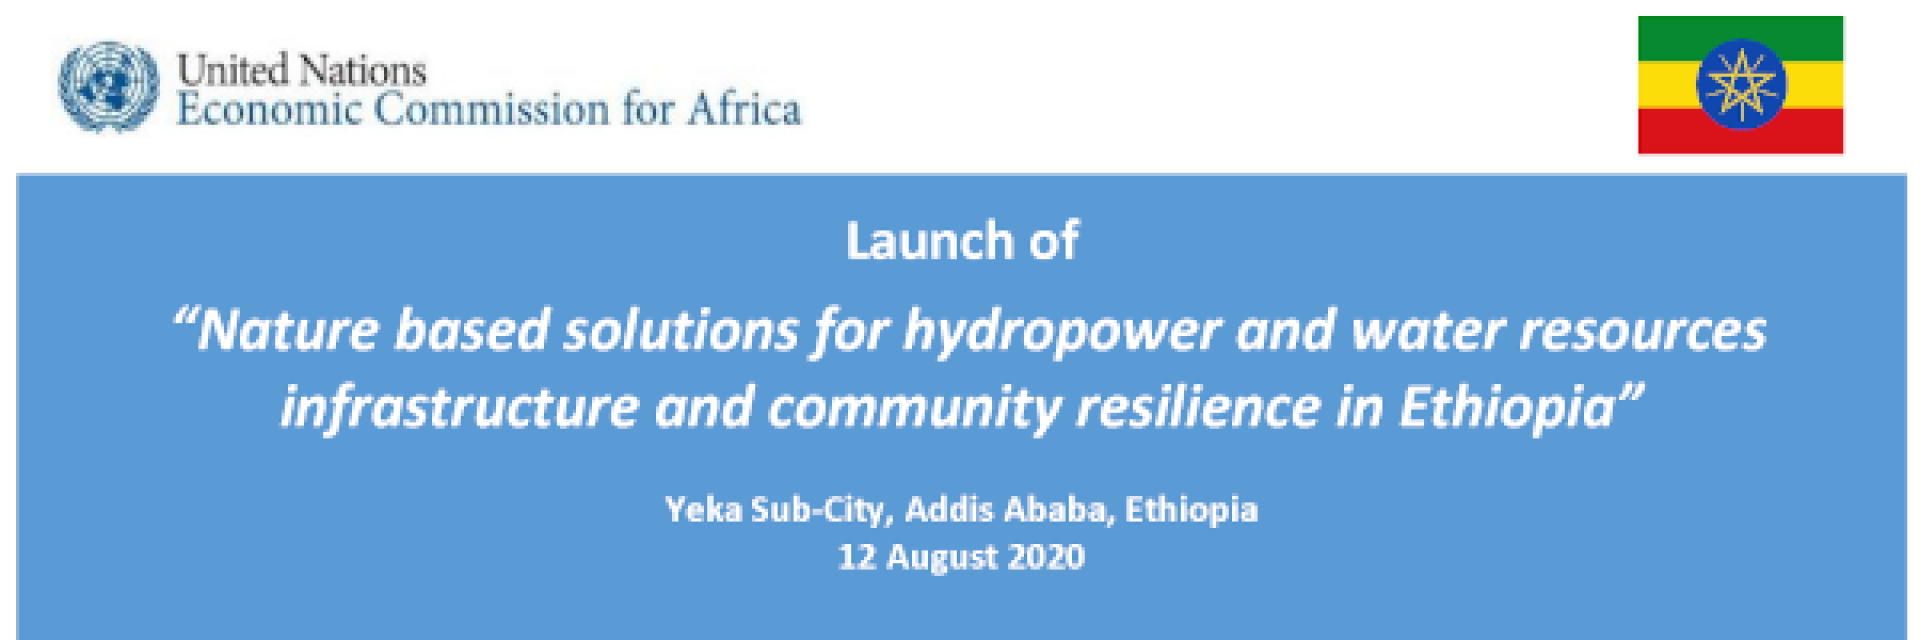 Launch of project to enhance “Nature based solutions for water resources infrastructure and community resilience in Ethiopia”